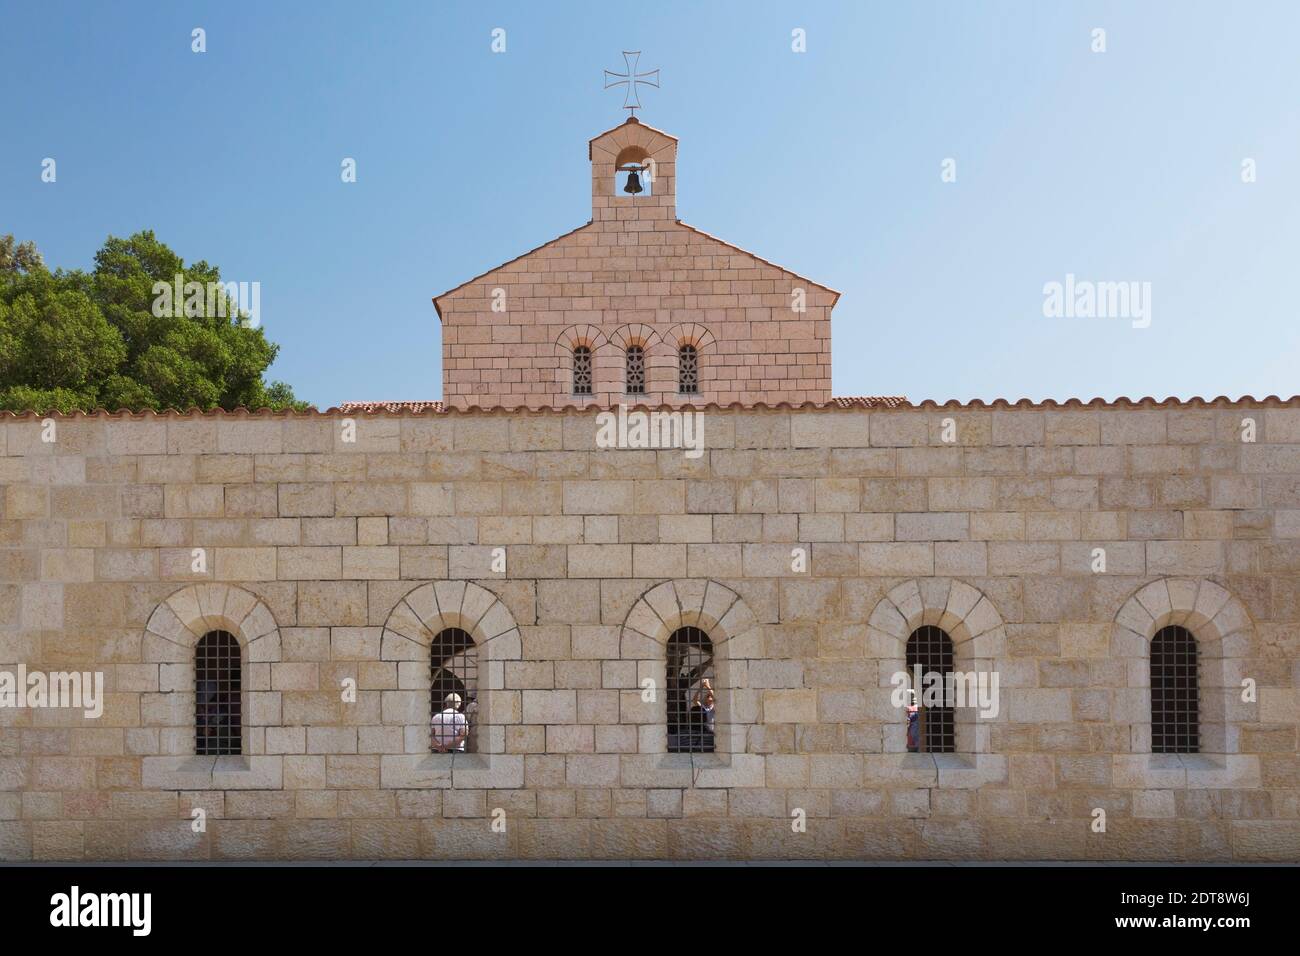 Church of the Multiplication of the Loaves and Fish, Tabgha, Sea of Galilee region, Israel Stock Photo